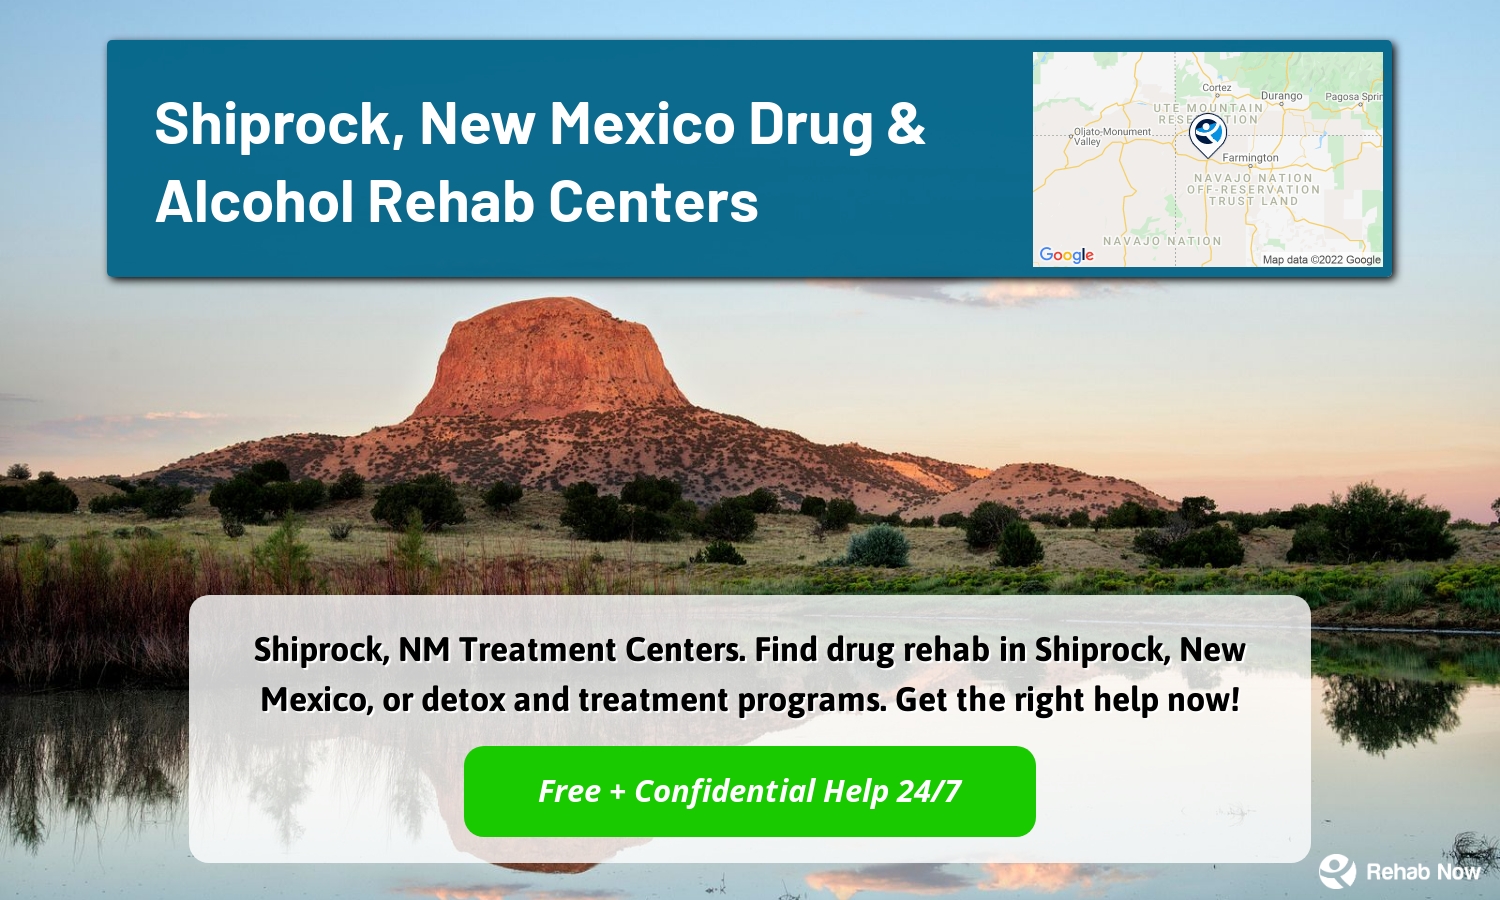 Shiprock, NM Treatment Centers. Find drug rehab in Shiprock, New Mexico, or detox and treatment programs. Get the right help now!